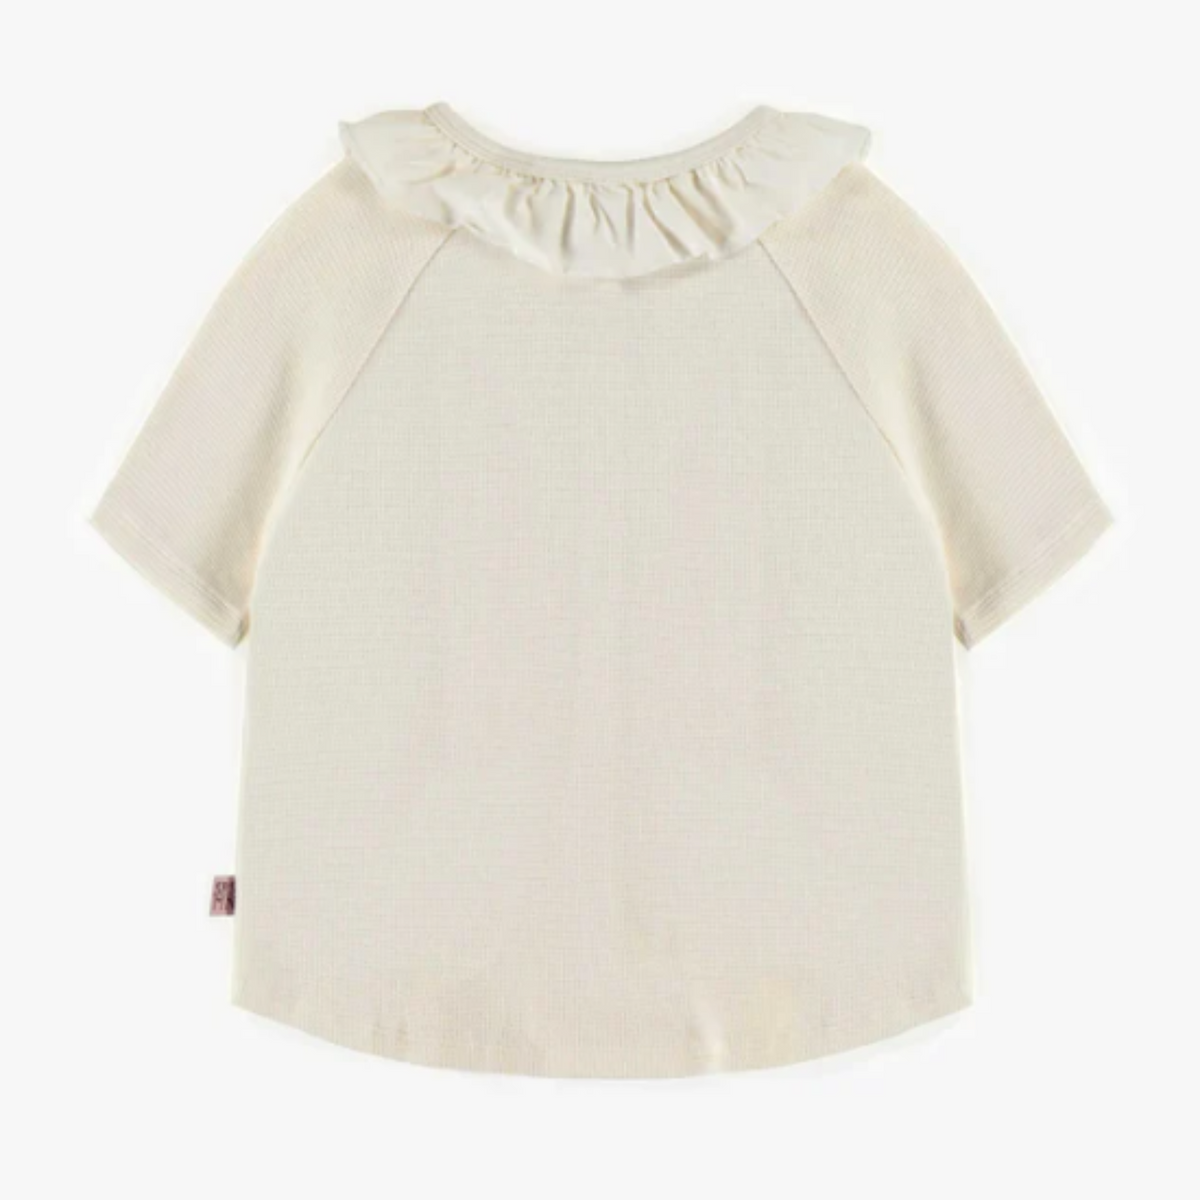 Cream short-sleeved t-shirt in waffle jersey, child